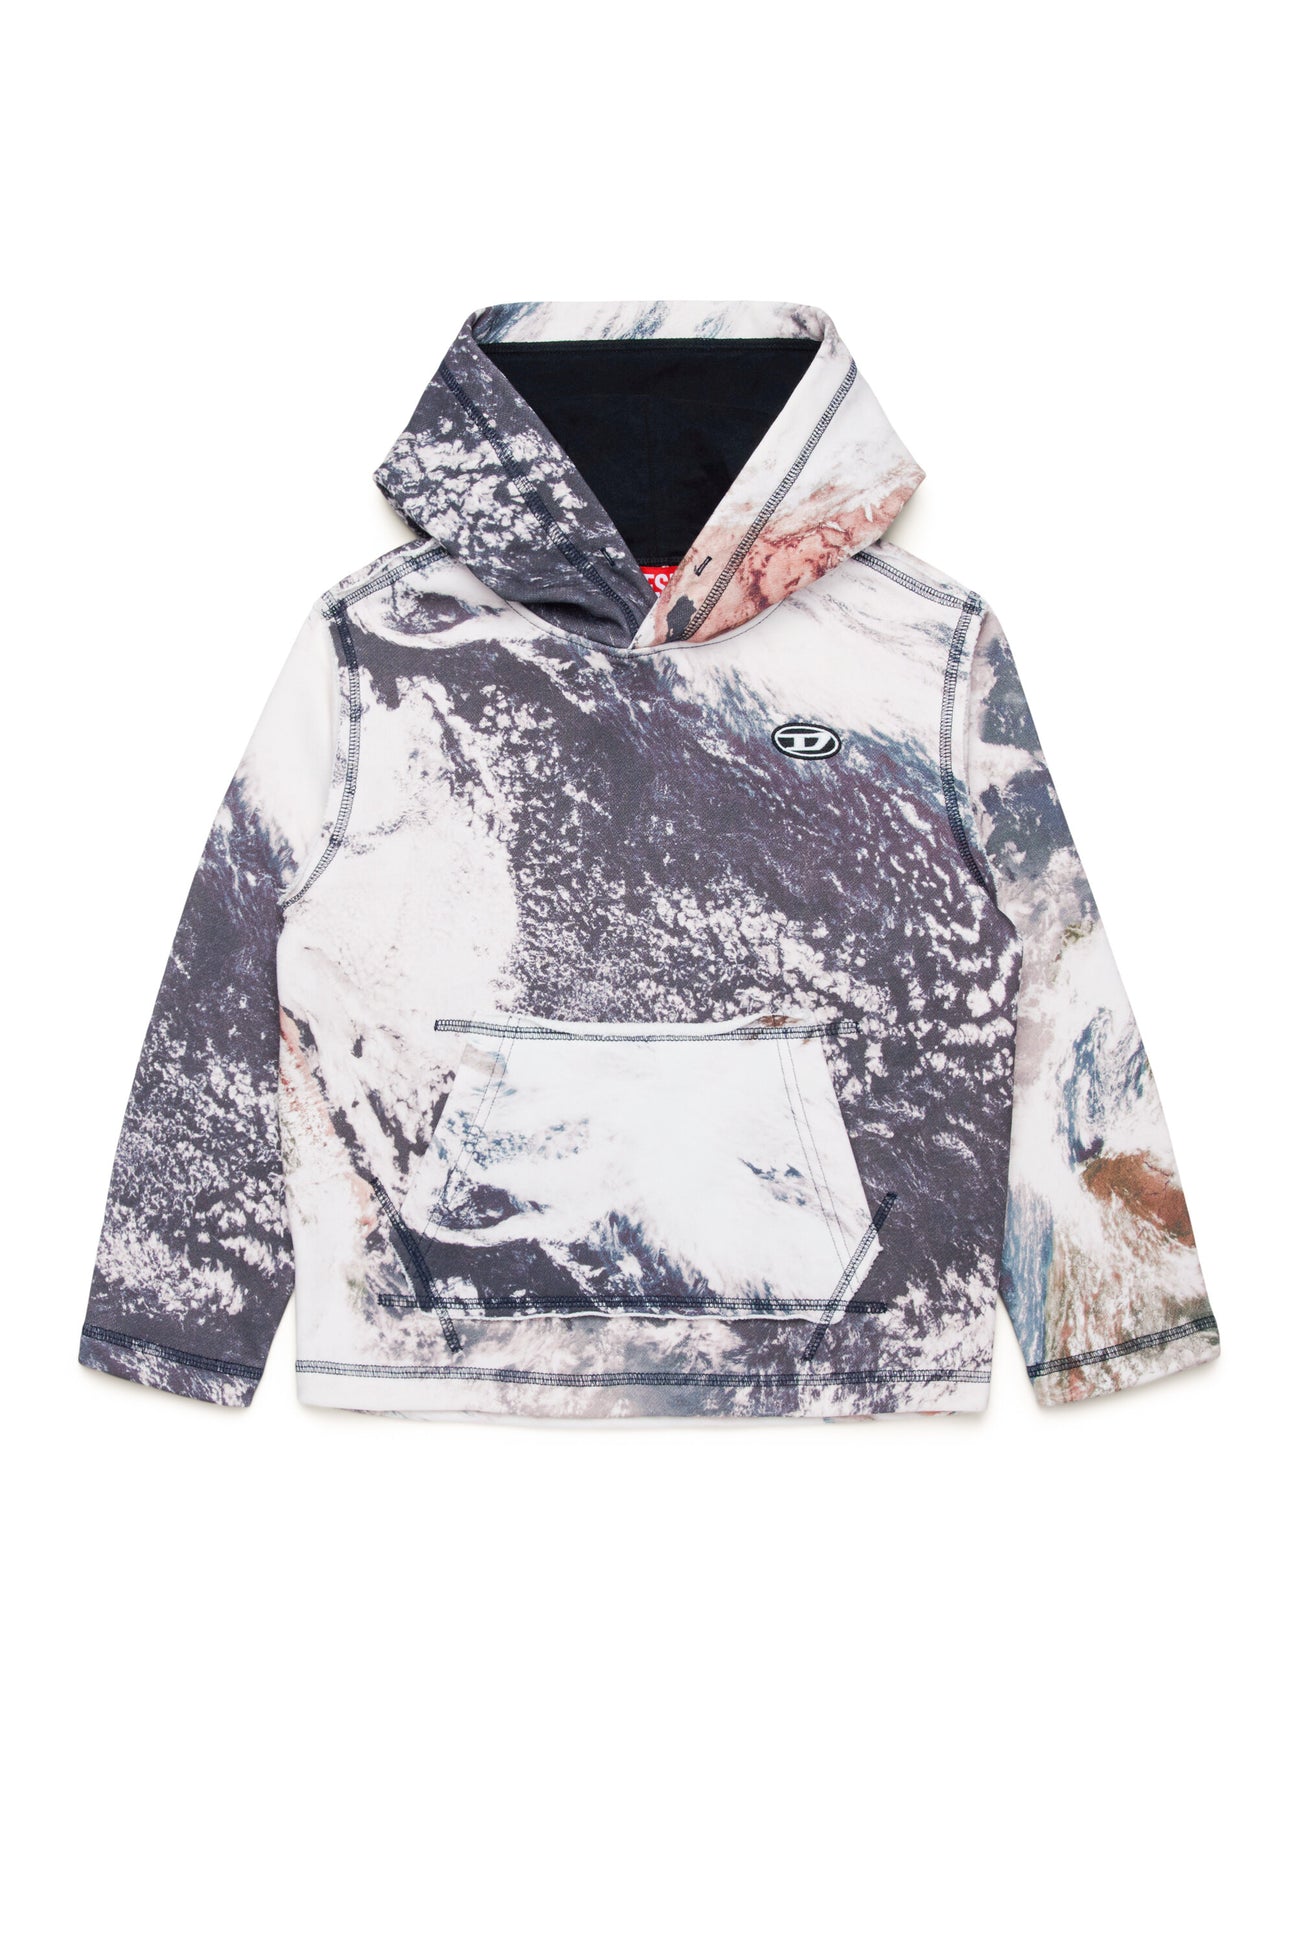 All-over Planet Camou hooded sweatshirt 